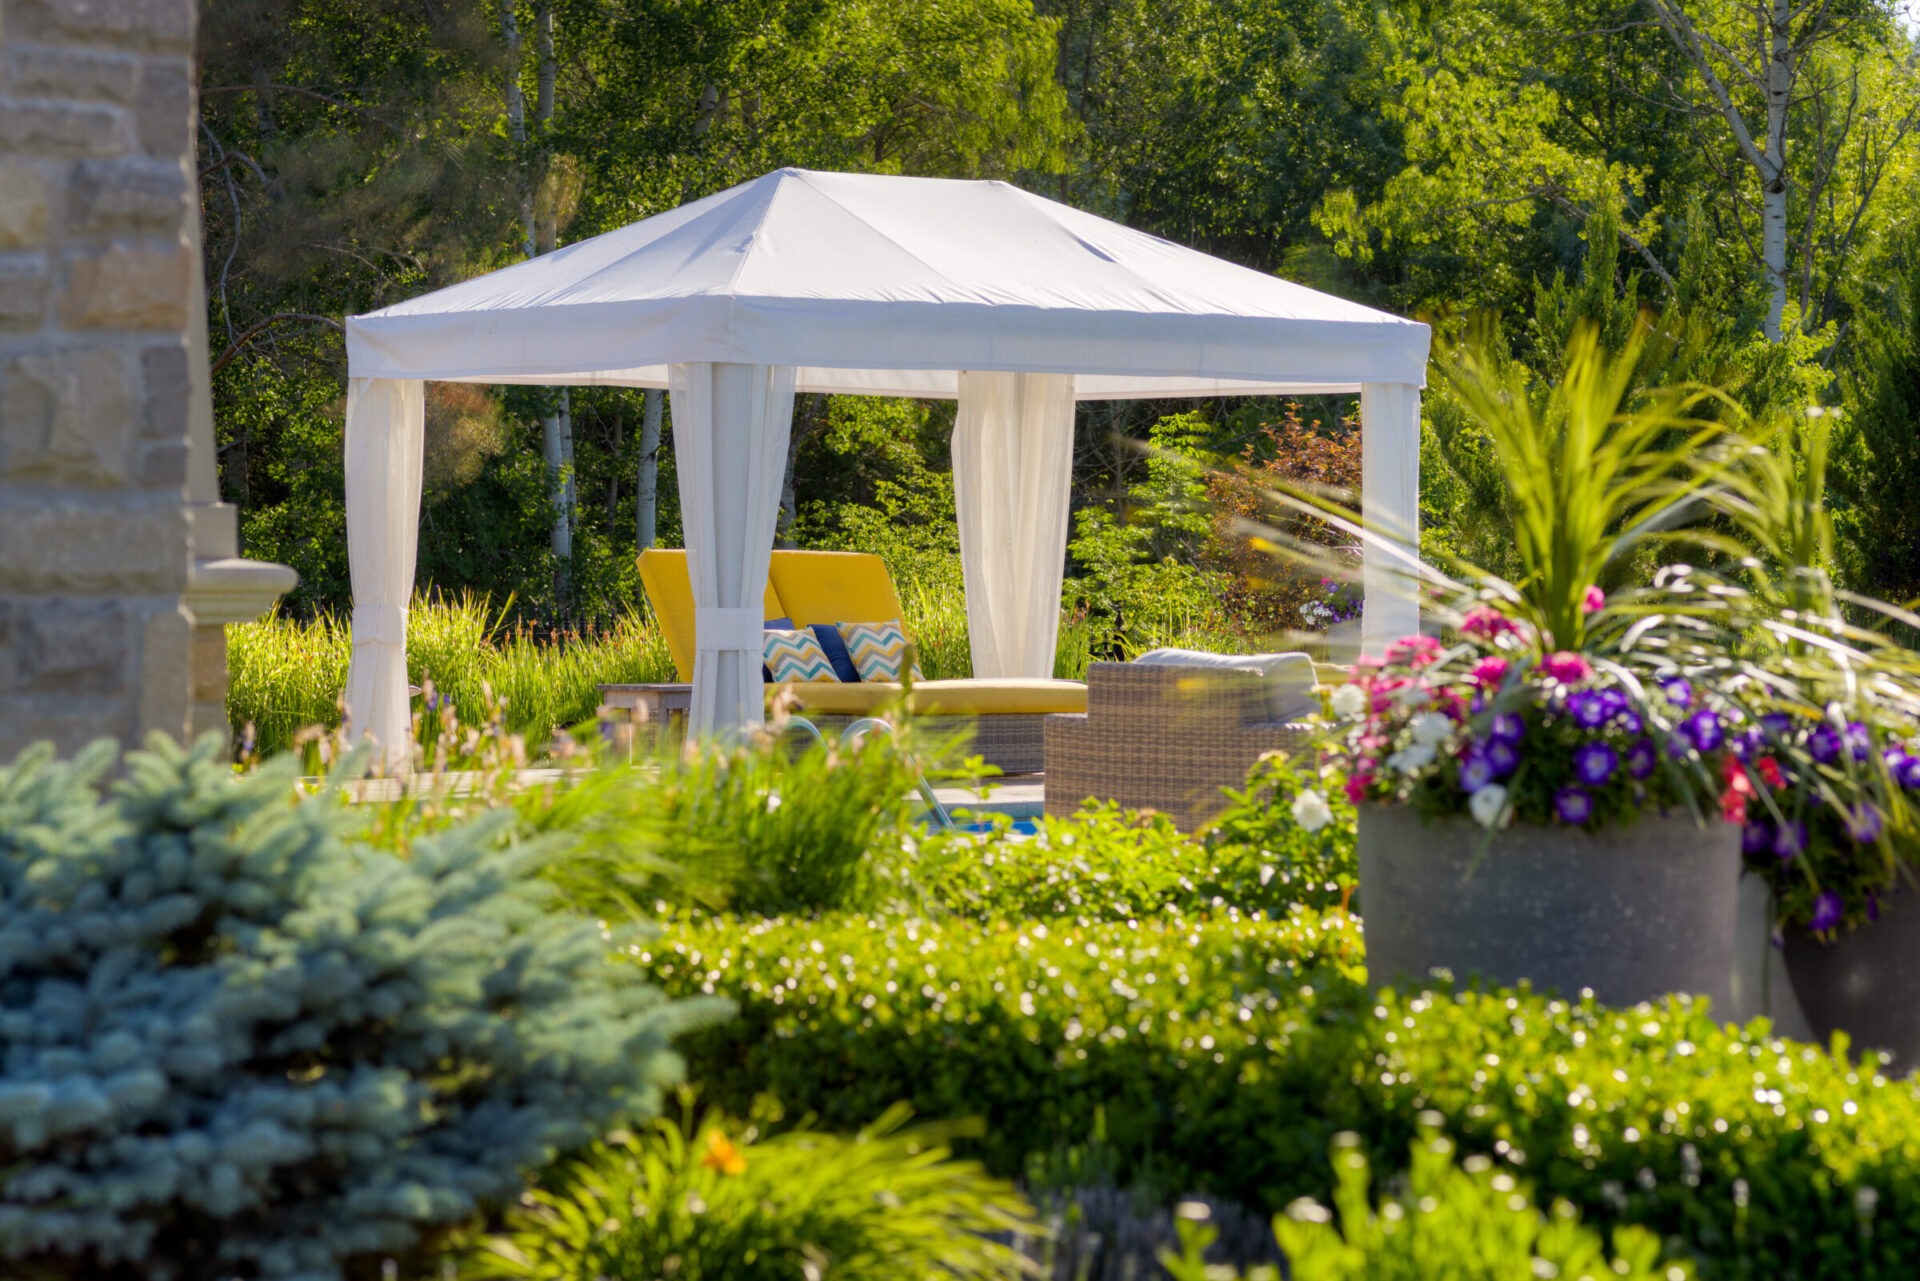 Luxurious garden gazebo with white curtains and yellow chairs amidst lush greenery and vibrant flowering plants on a sunny day with clear blue skies.